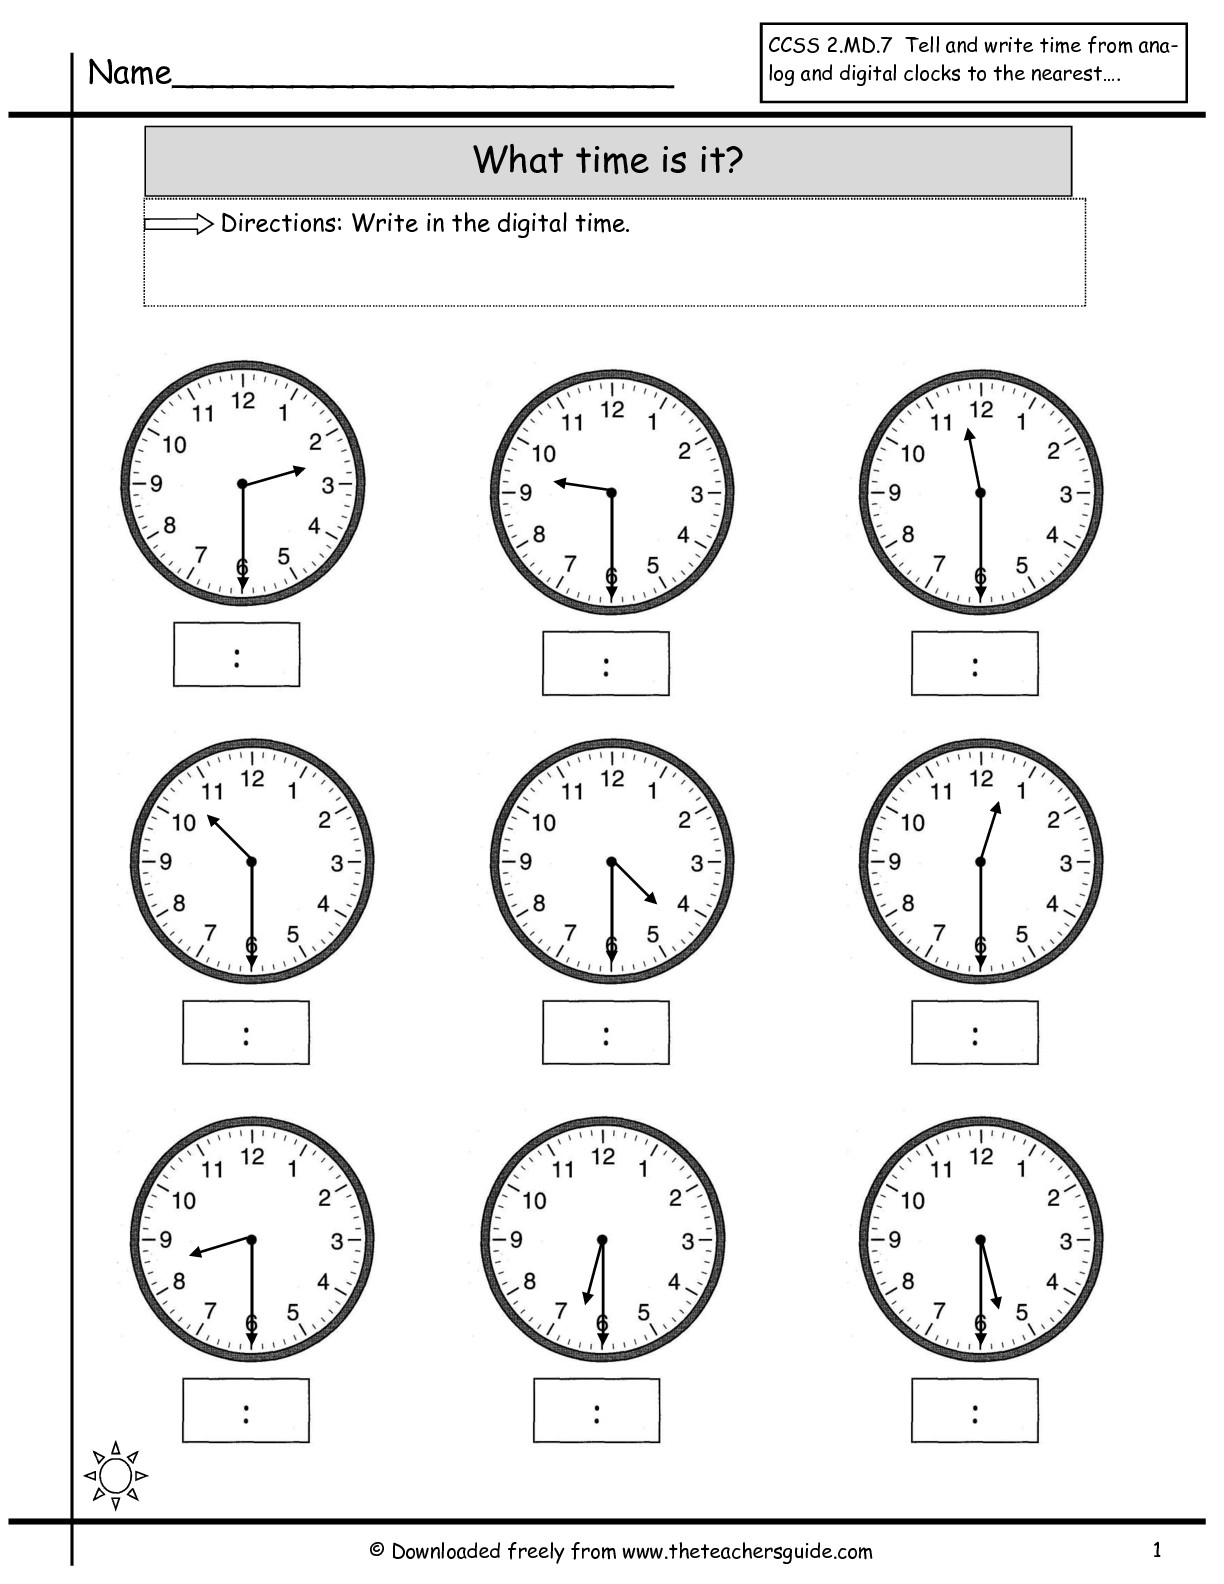 15-best-images-of-time-lapse-worksheets-telling-time-worksheets